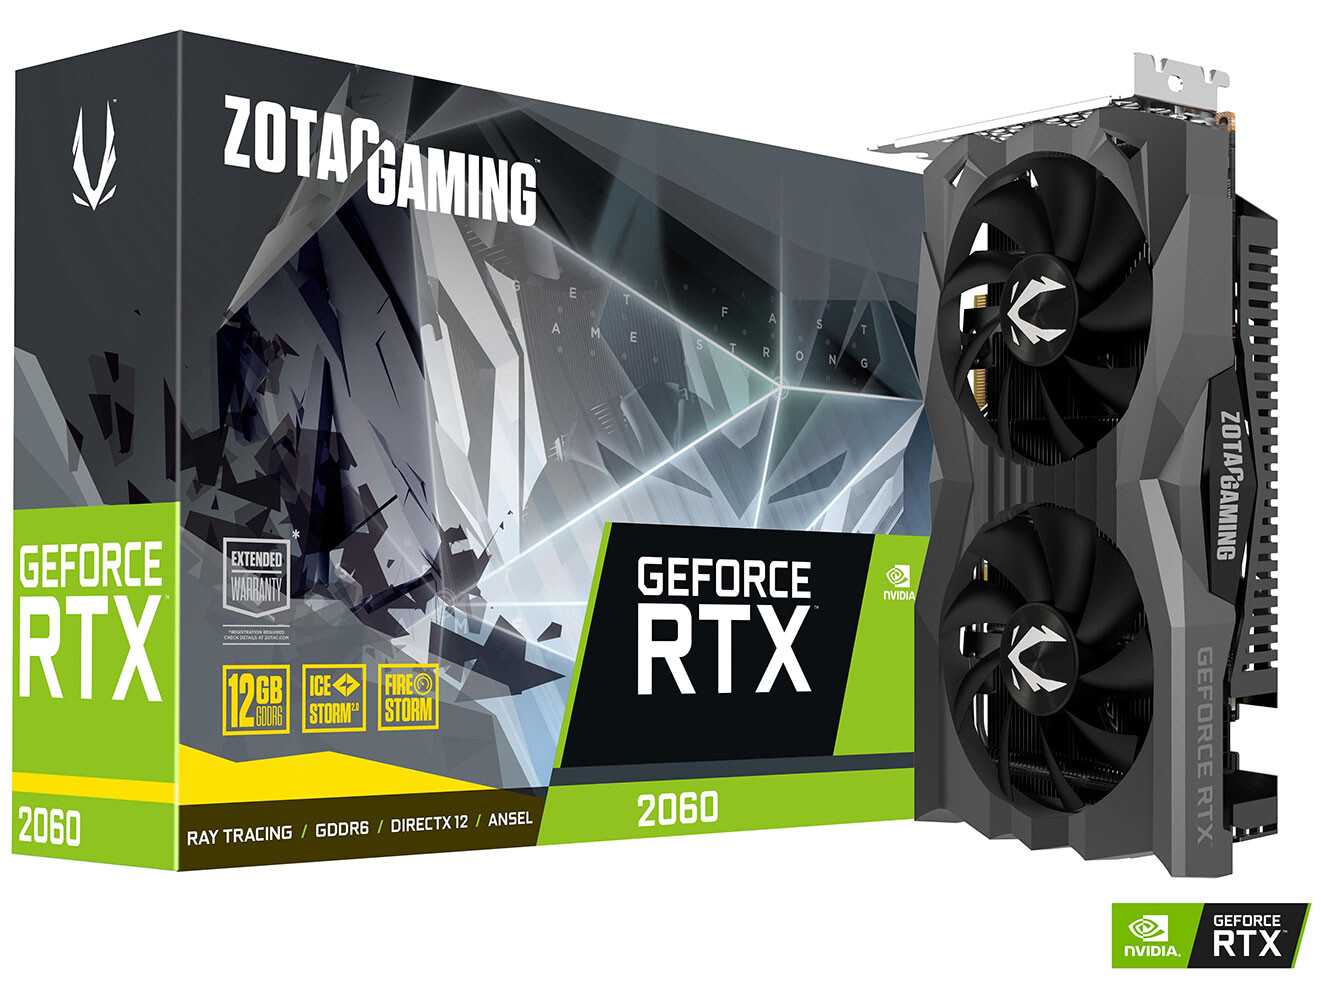 ZOTAC Launches its GeForce RTX 2060 12GB Graphics Card | TechPowerUp